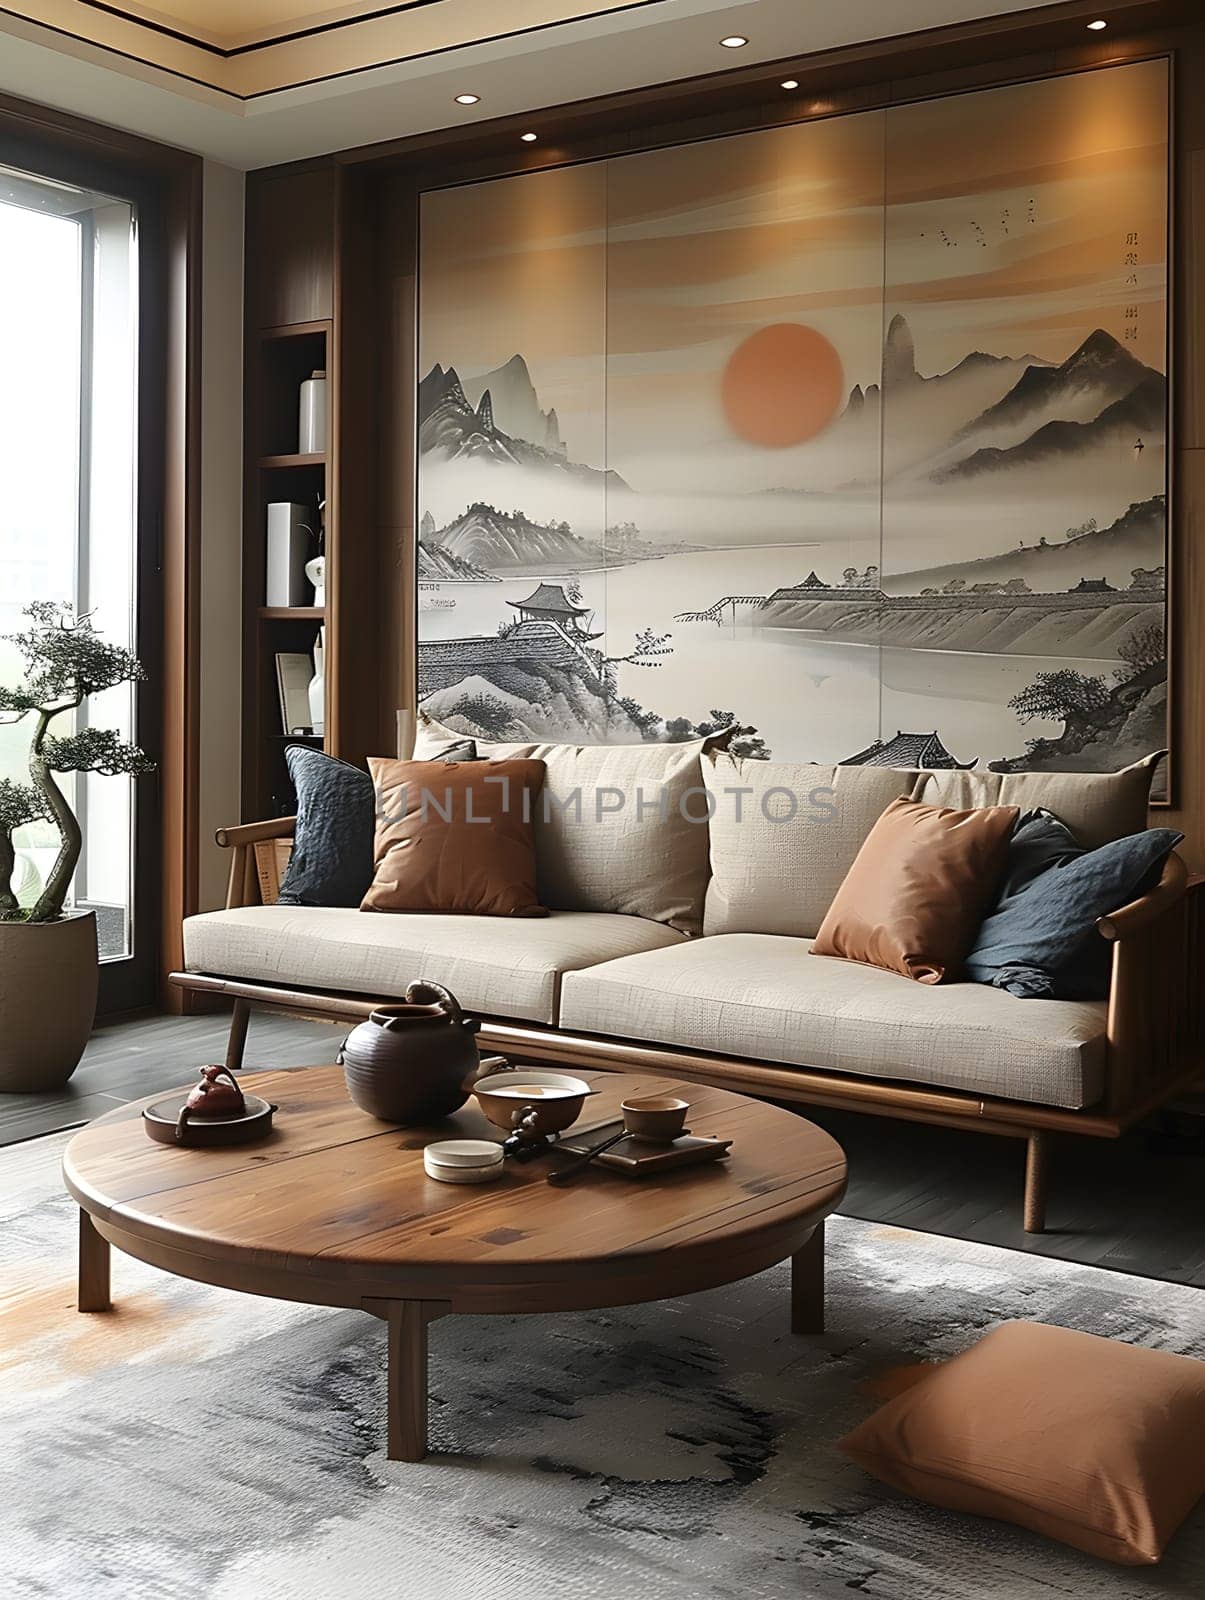 A cozy living room with comfortable furniture like a couch and coffee table, accentuated by a painting on the wall. The interior design features wood elements and a warm ambiance